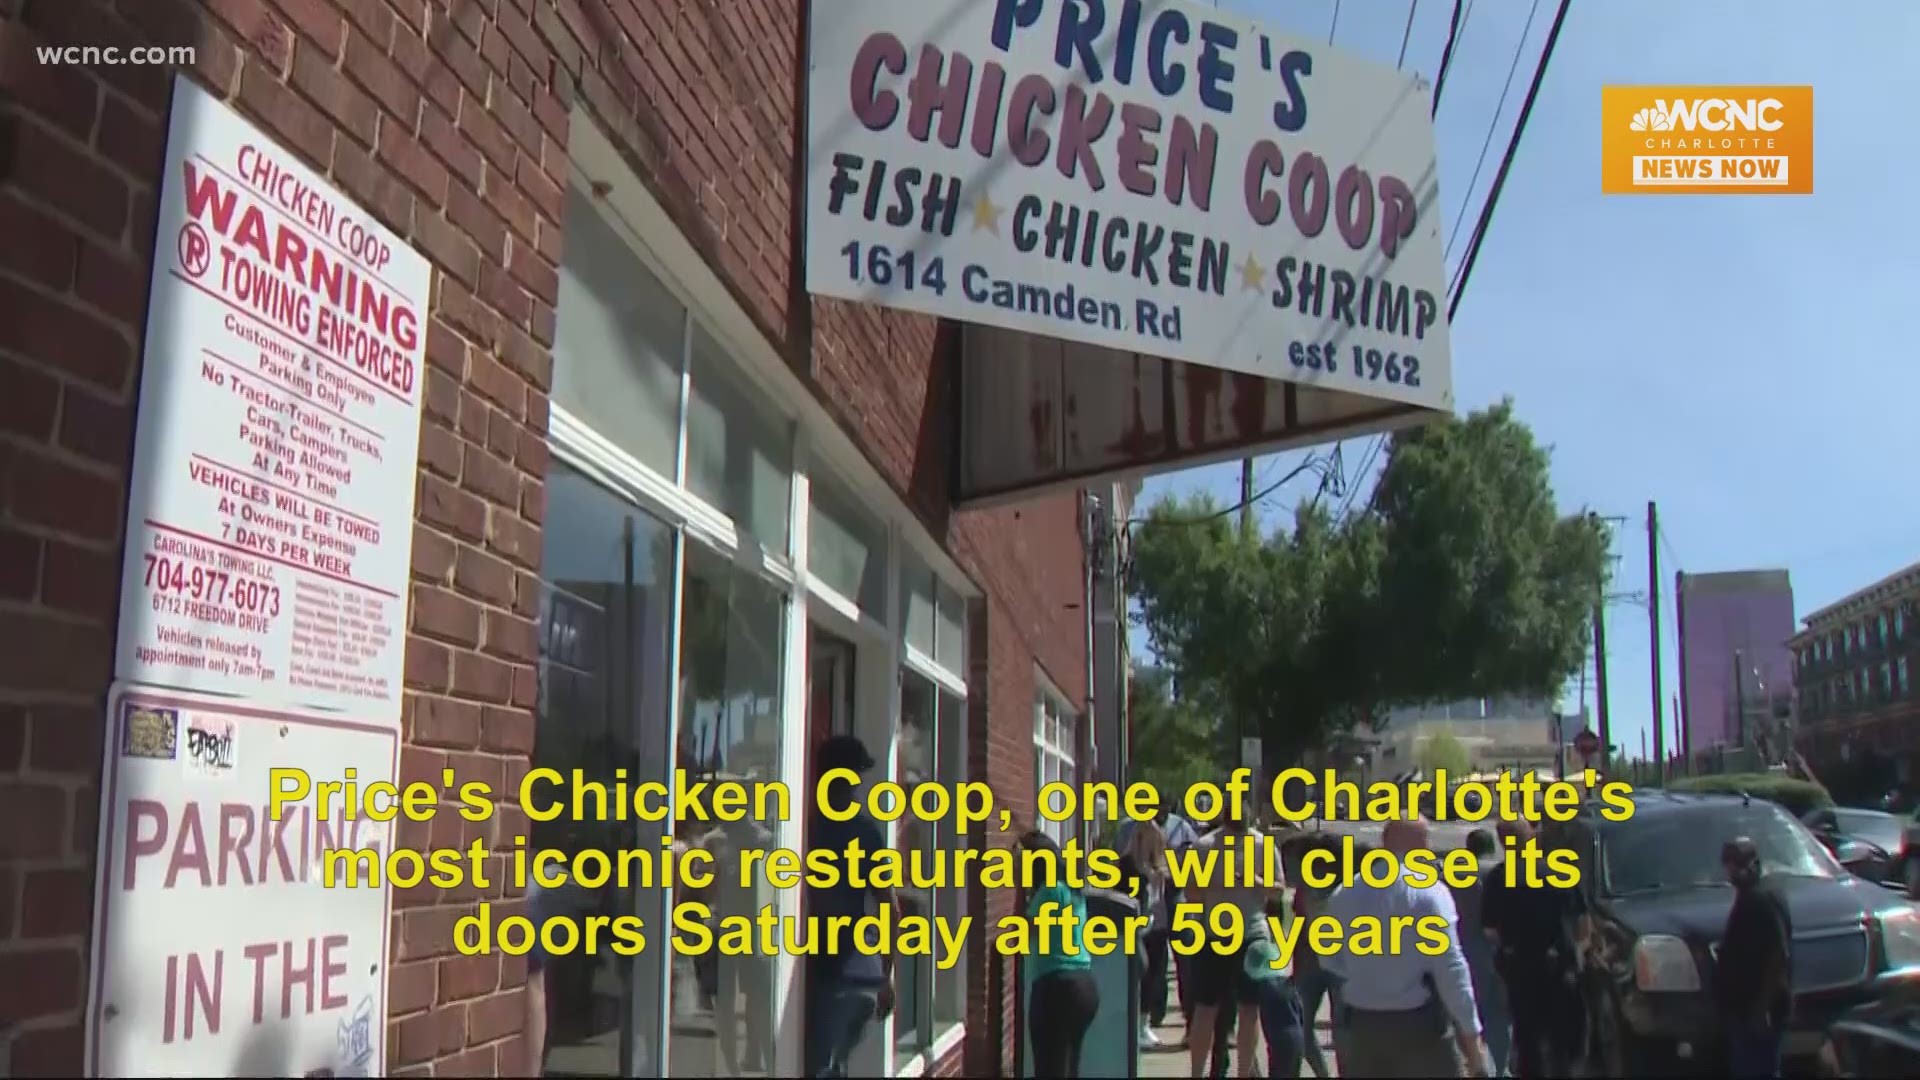 Jim Shibley made the 400-mile trip from Amelia Island, Florida, for one last lunch at Charlotte's legendary Price's Chicken Coop.